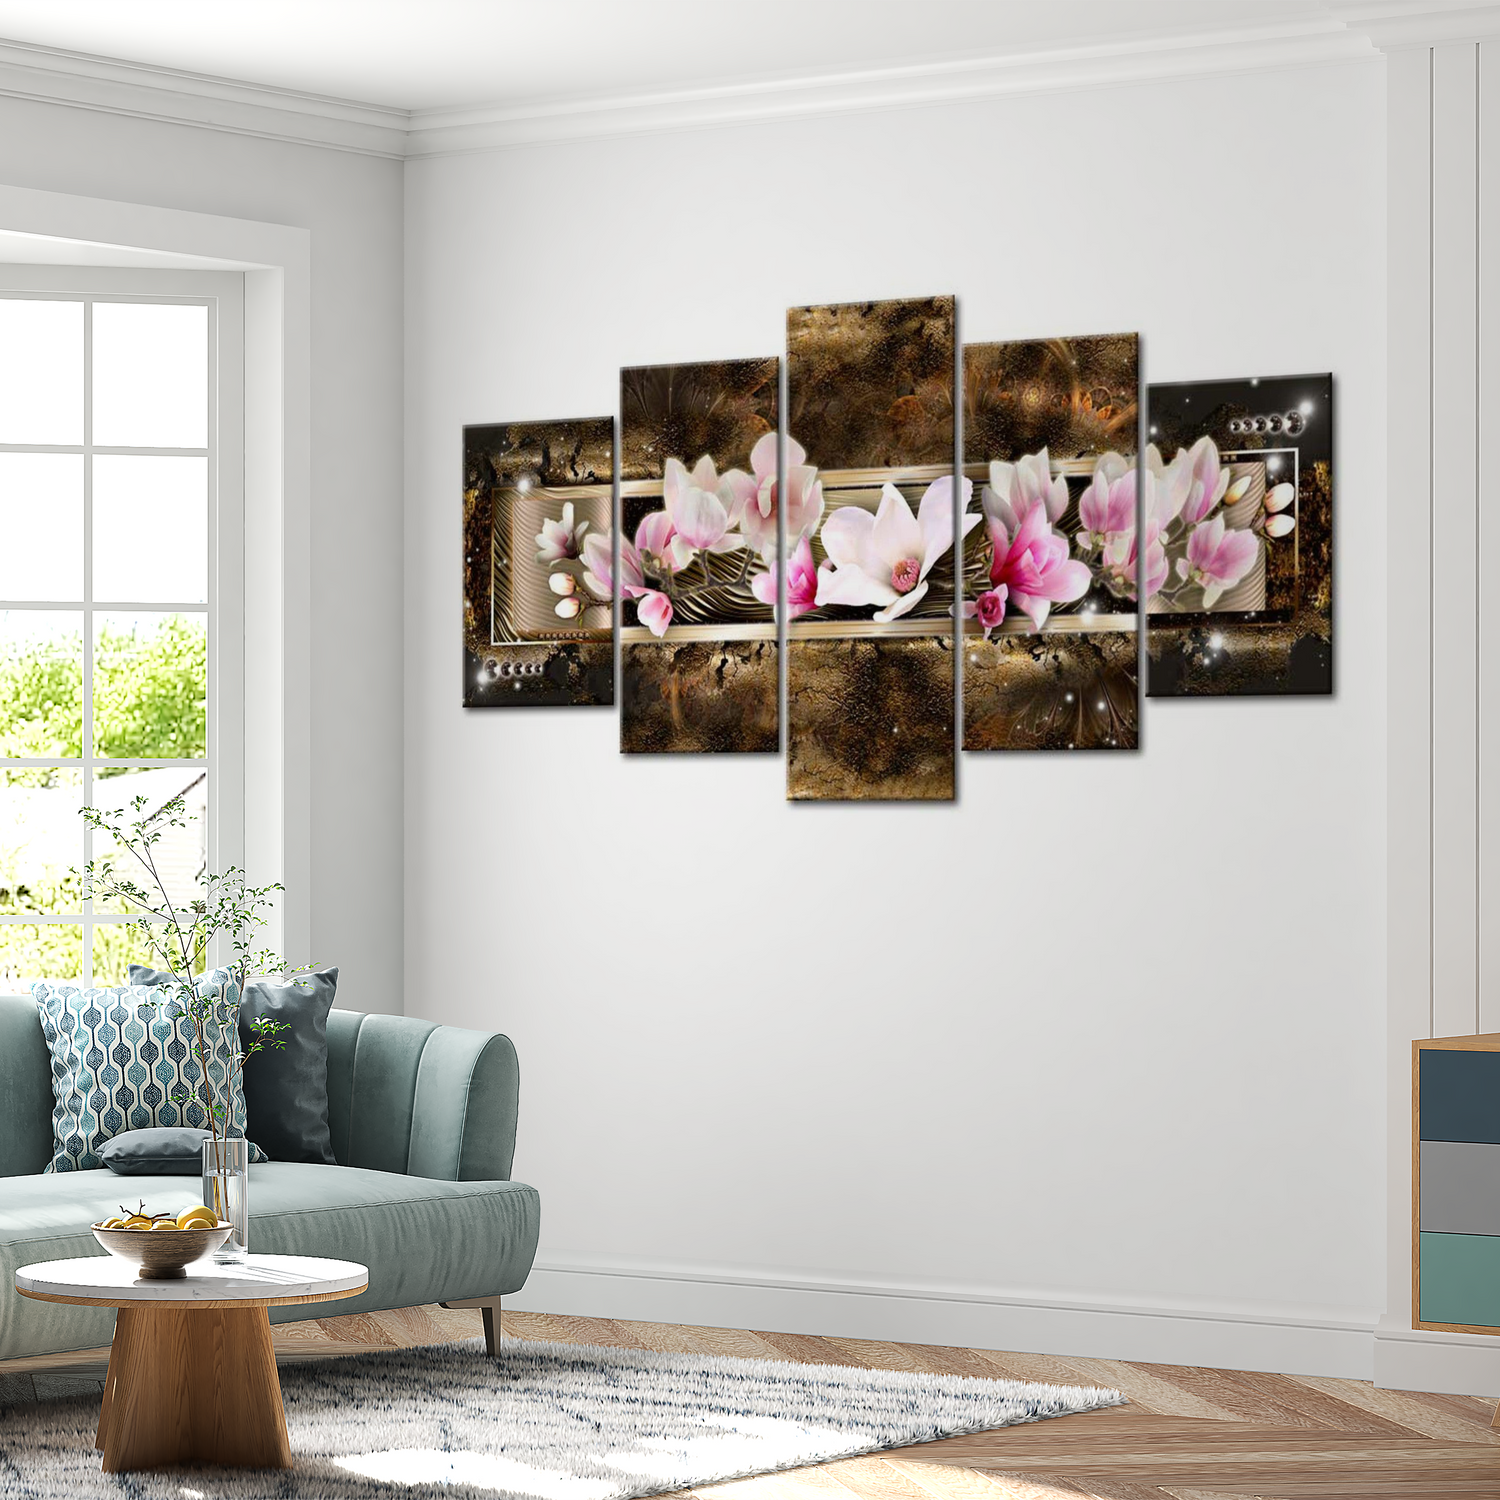 Stretched Canvas Floral Art - The Dream Of A Magnolia 40"Wx20"H